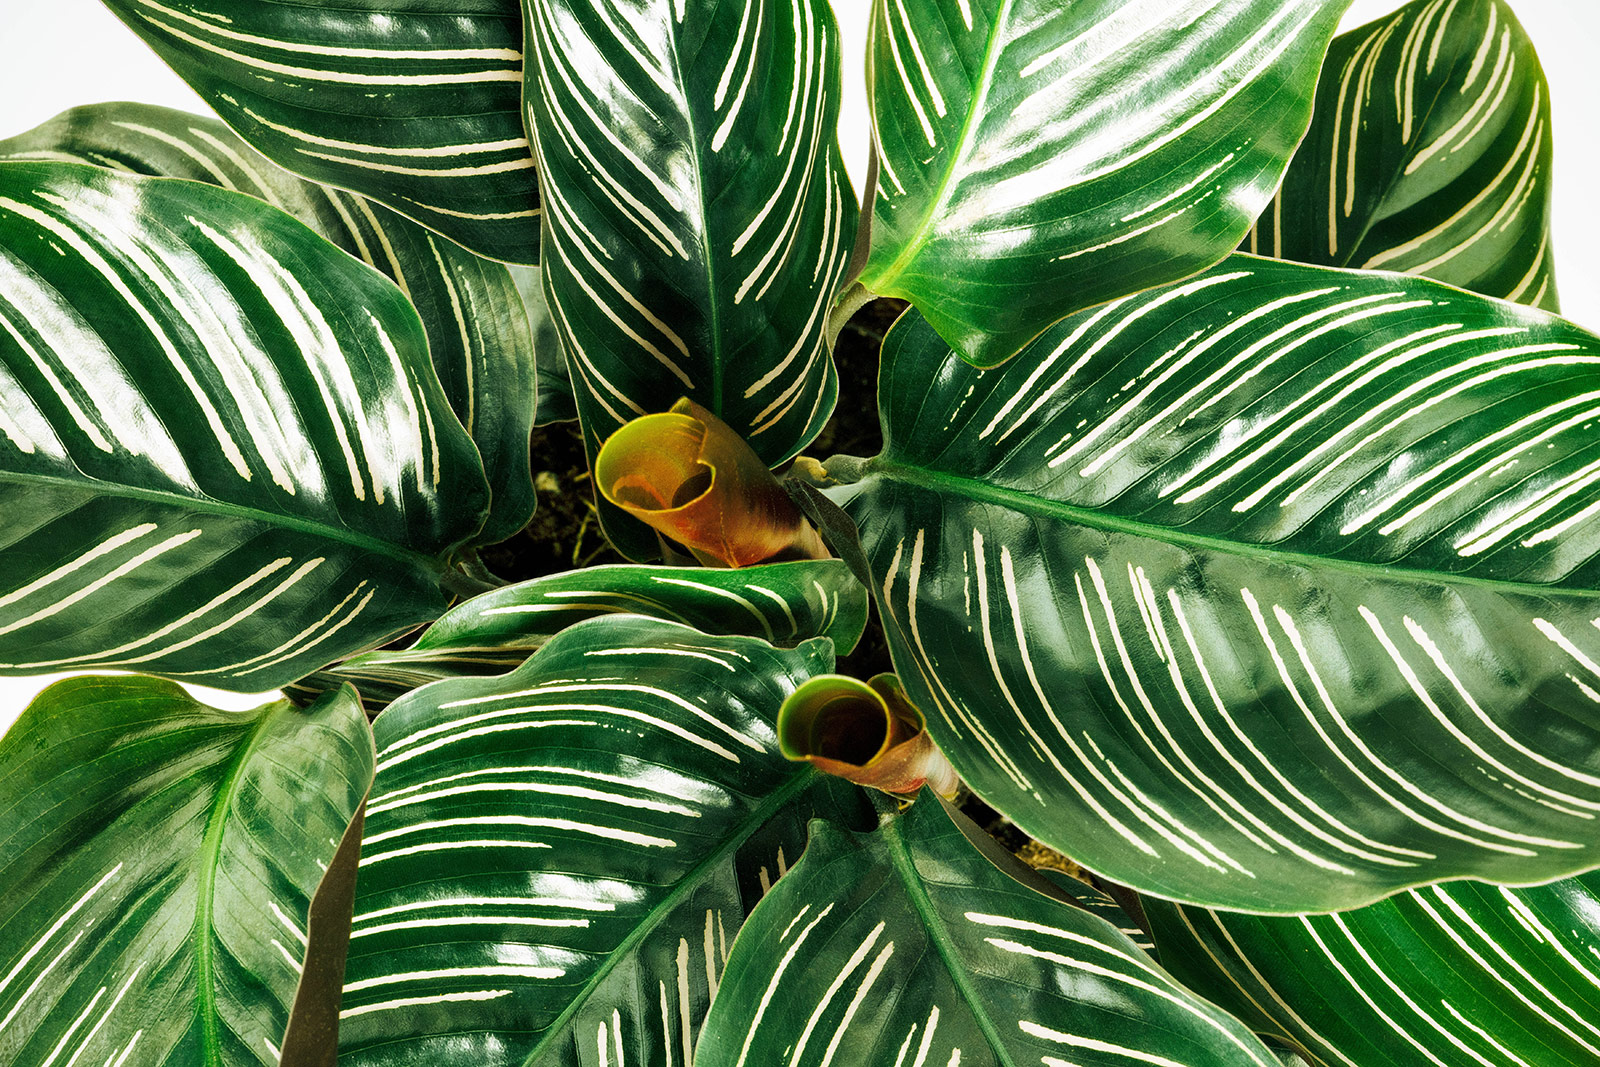 Close-up of Calathea ornata leaves with white pinstriped leaf veins